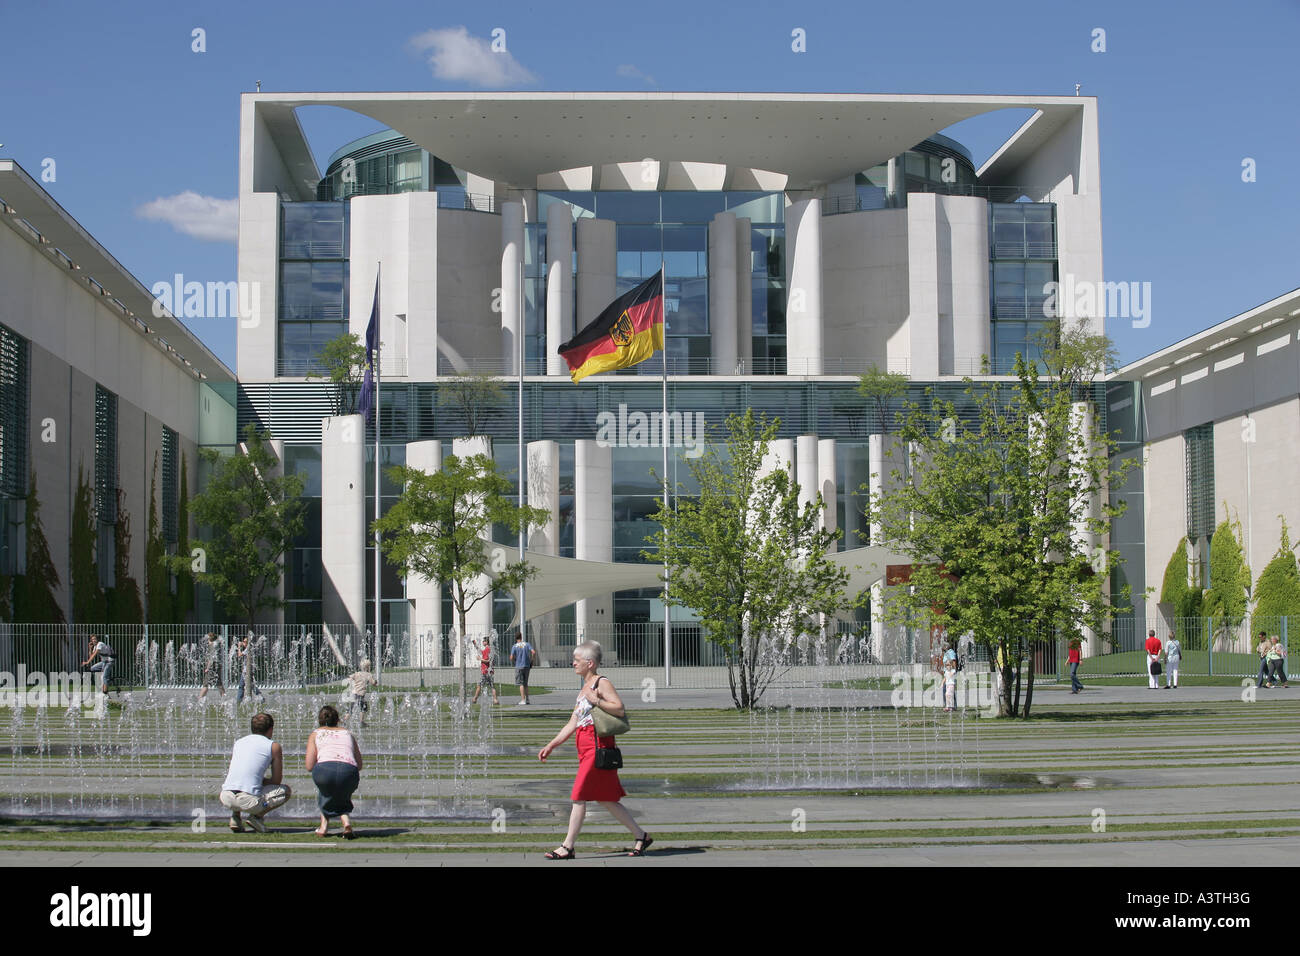 The chancellery in the german capital Berlin, Germany Stock Photo